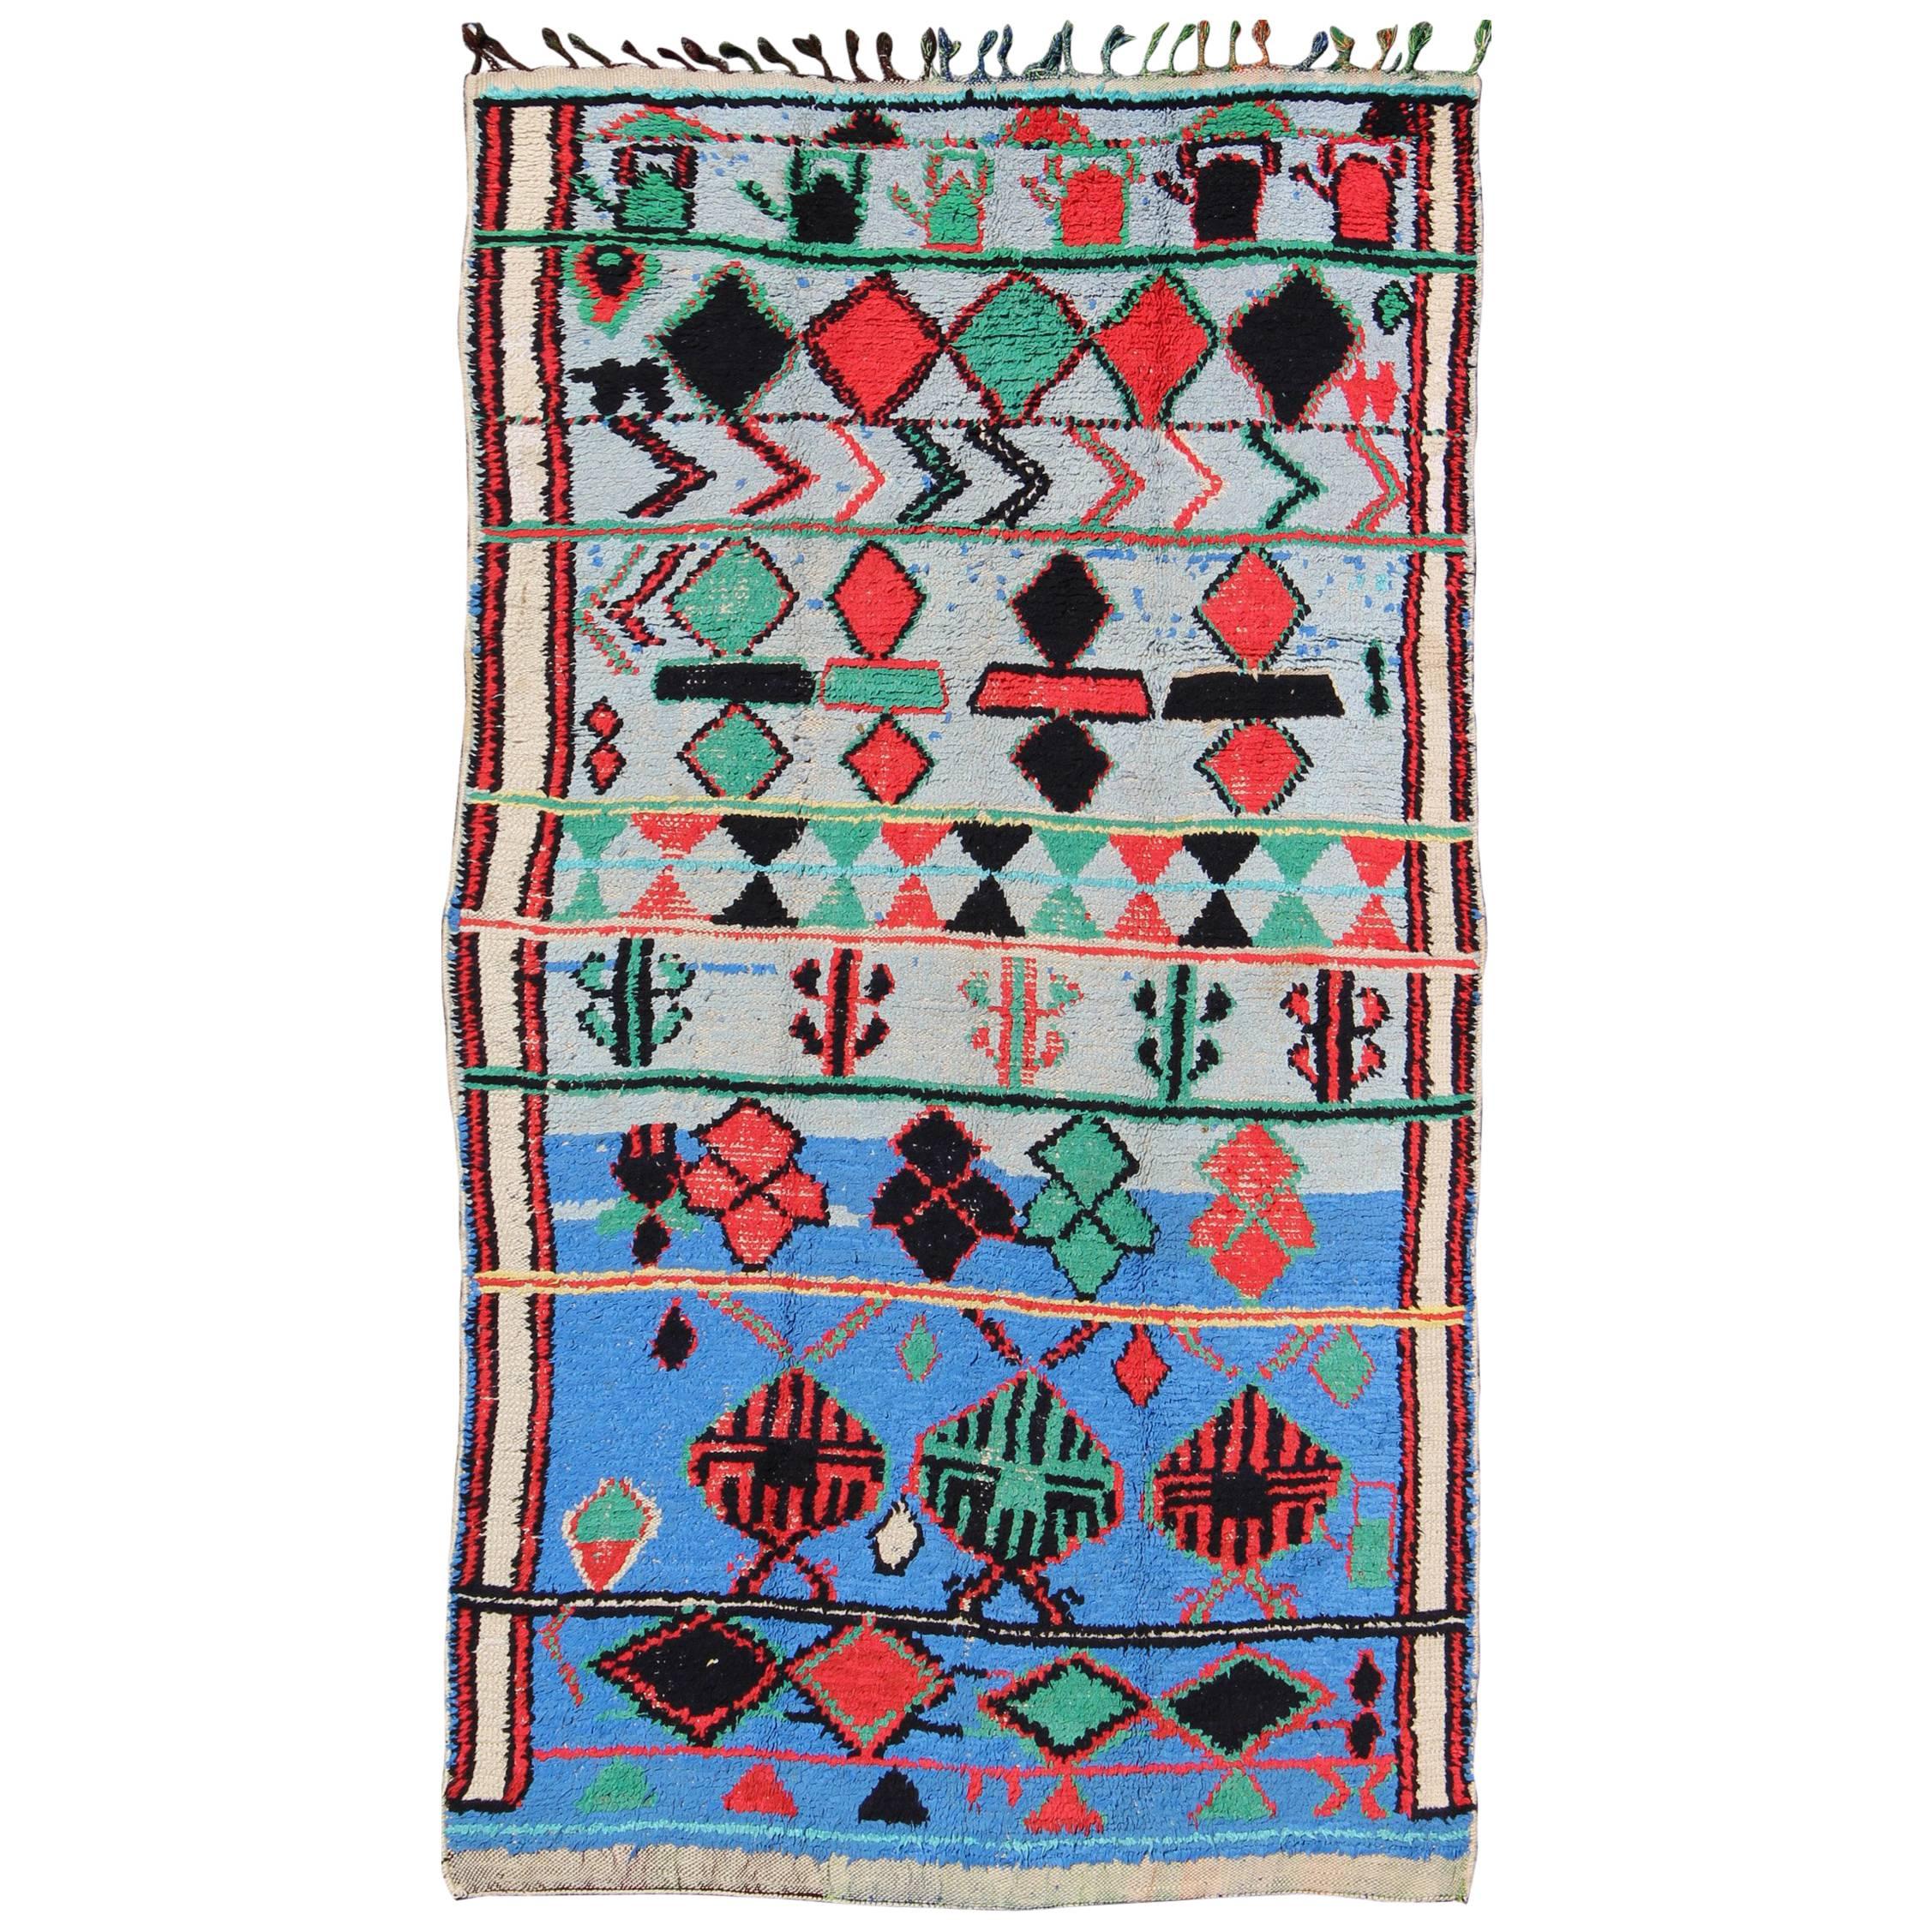 Vivid and Vibrant Vintage Moroccan Rug with Scattered Tribal Motifs